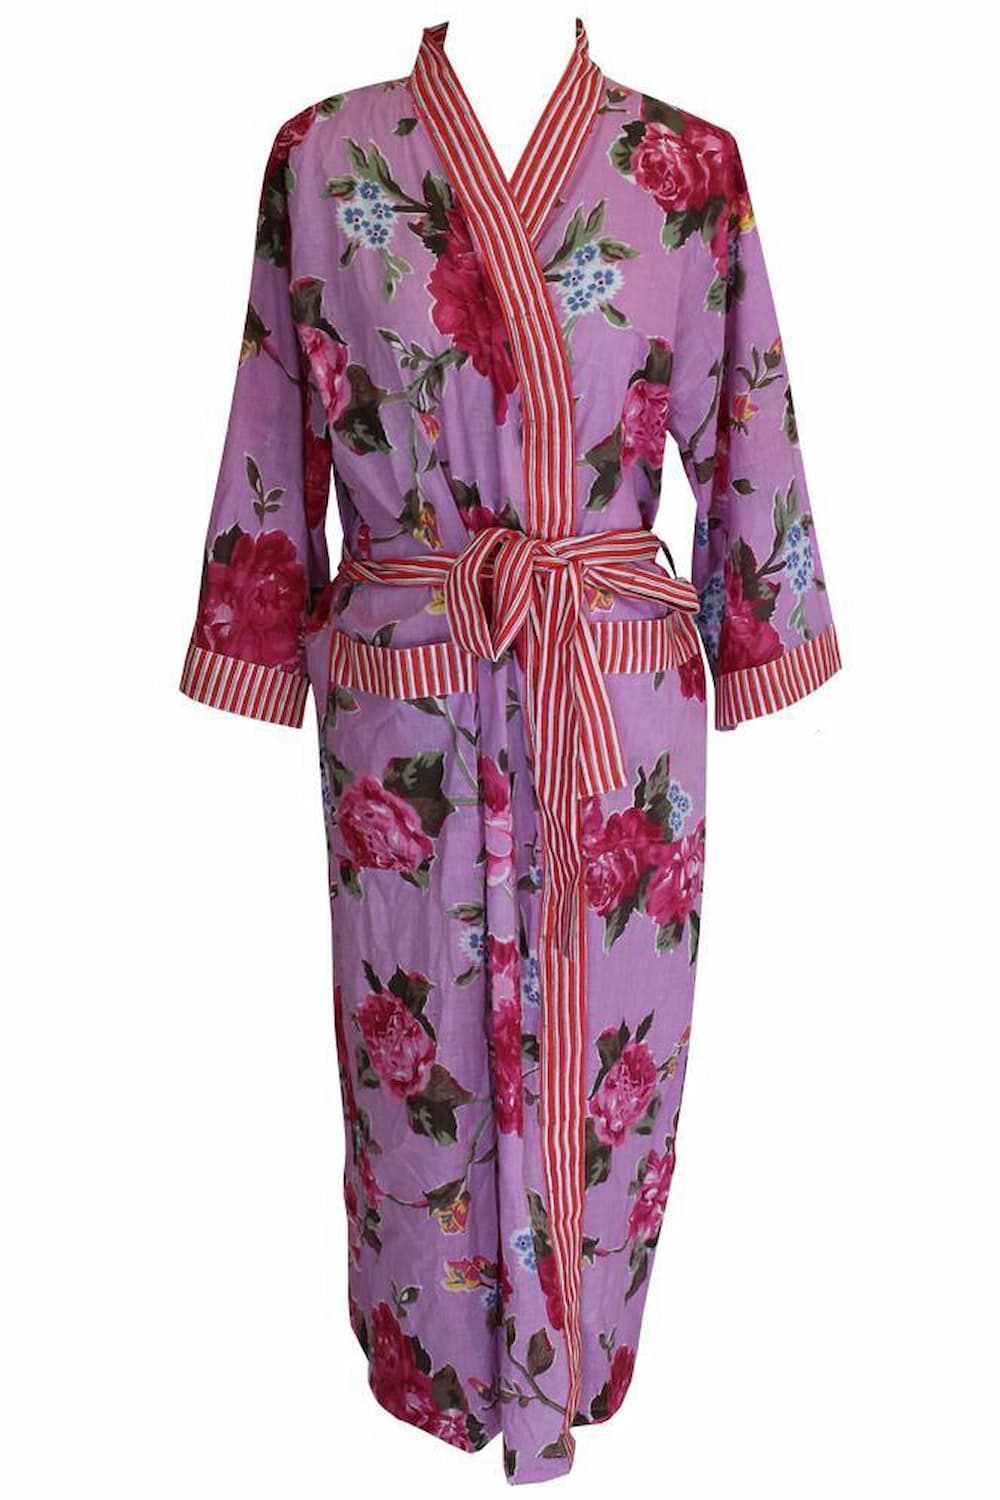 Lilac Rose Floral Dressing Gown for sale - Woodcock and Cavendish